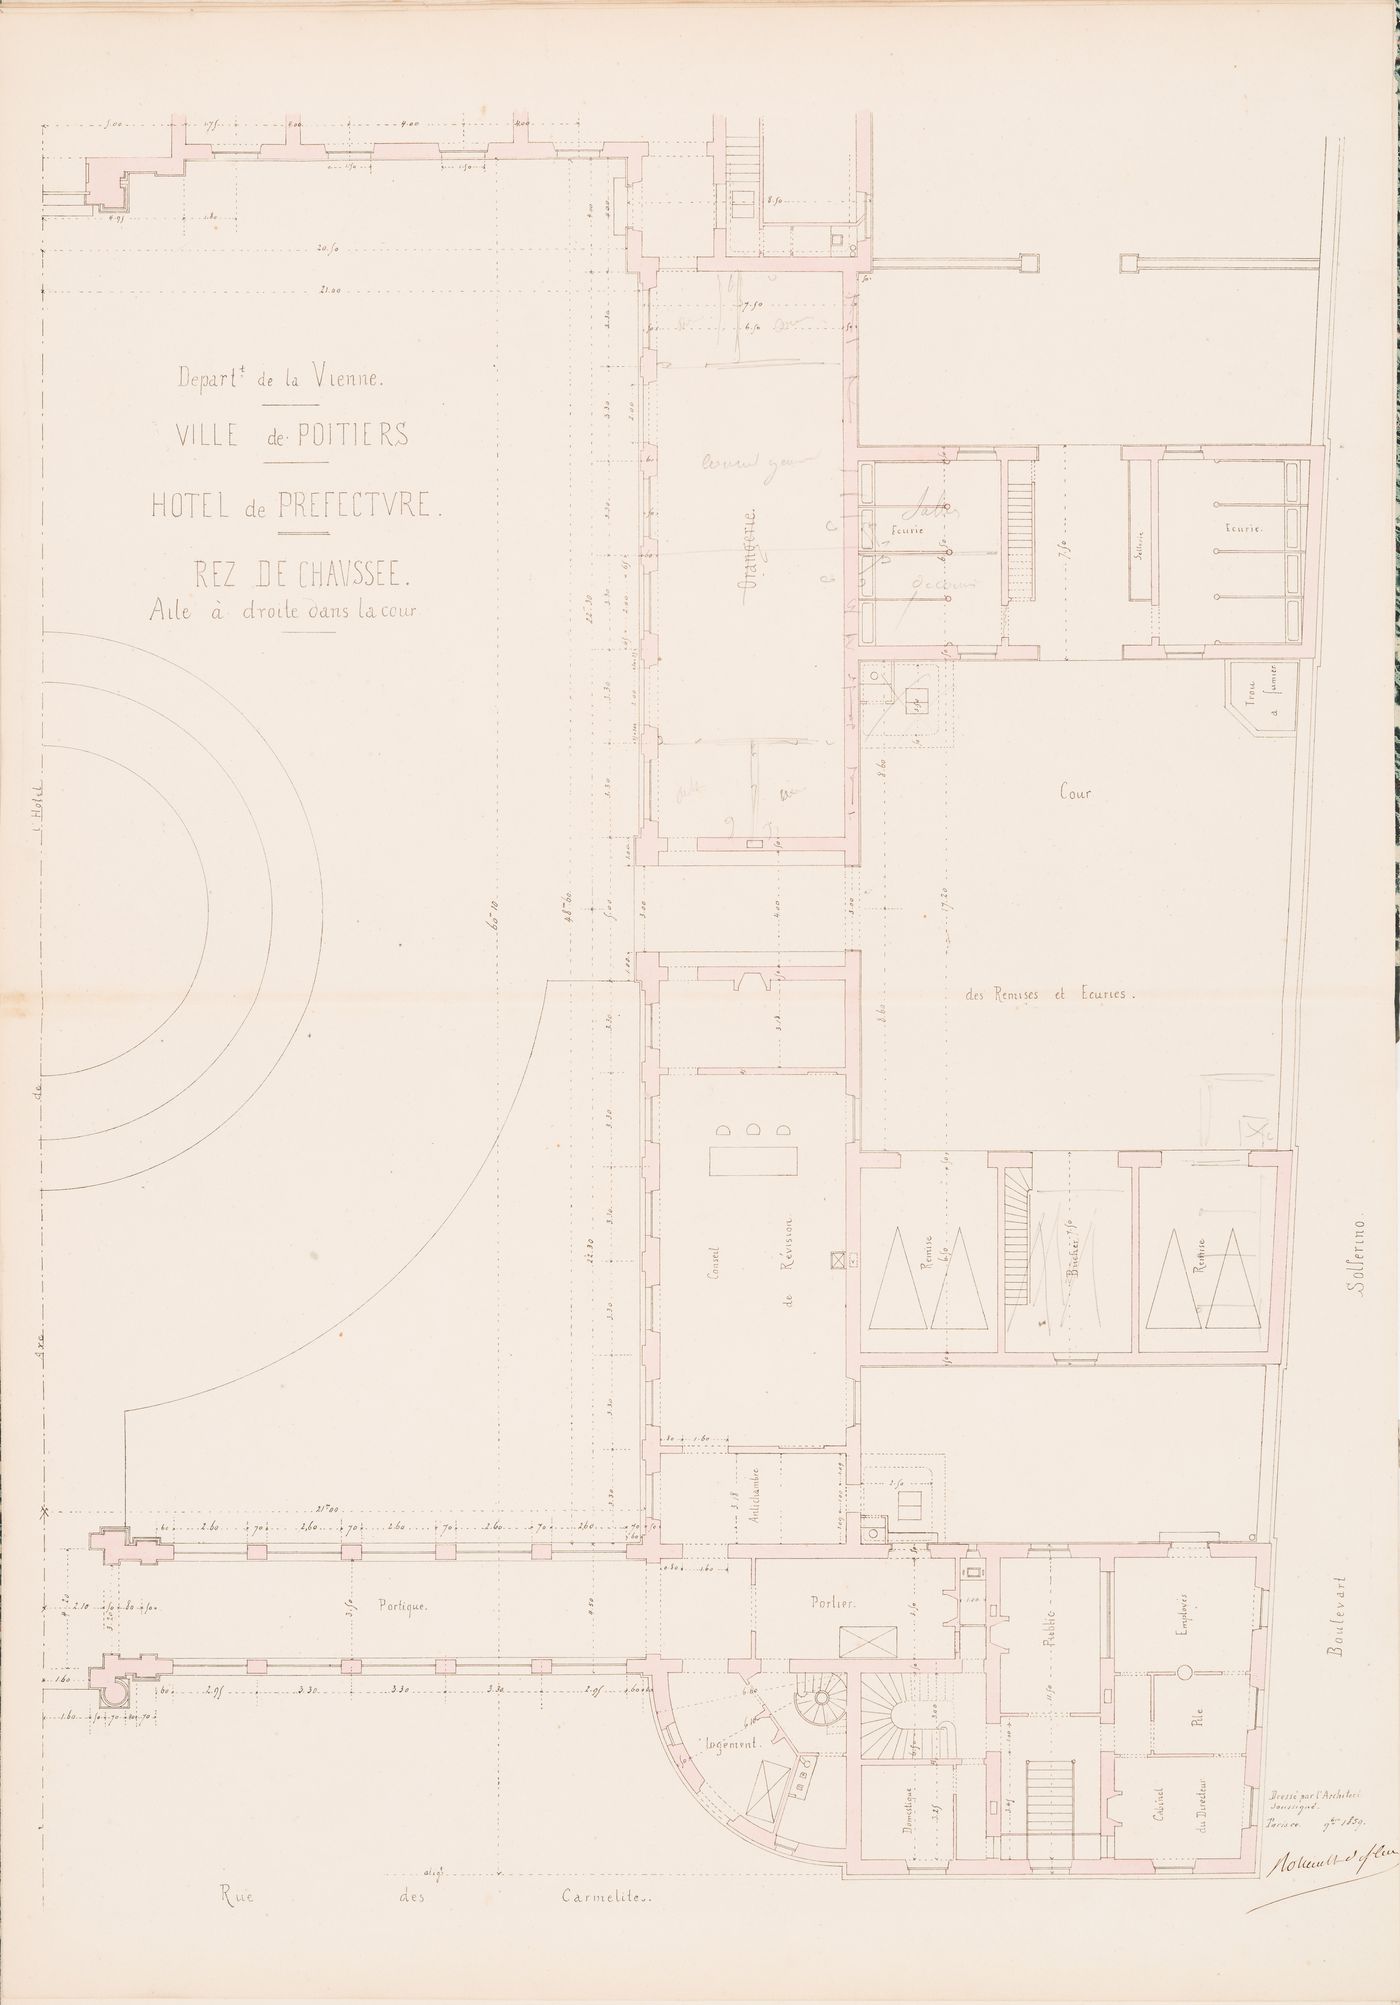 Project for a Hôtel de préfecture, Poitiers: Ground floor plan for the right wing